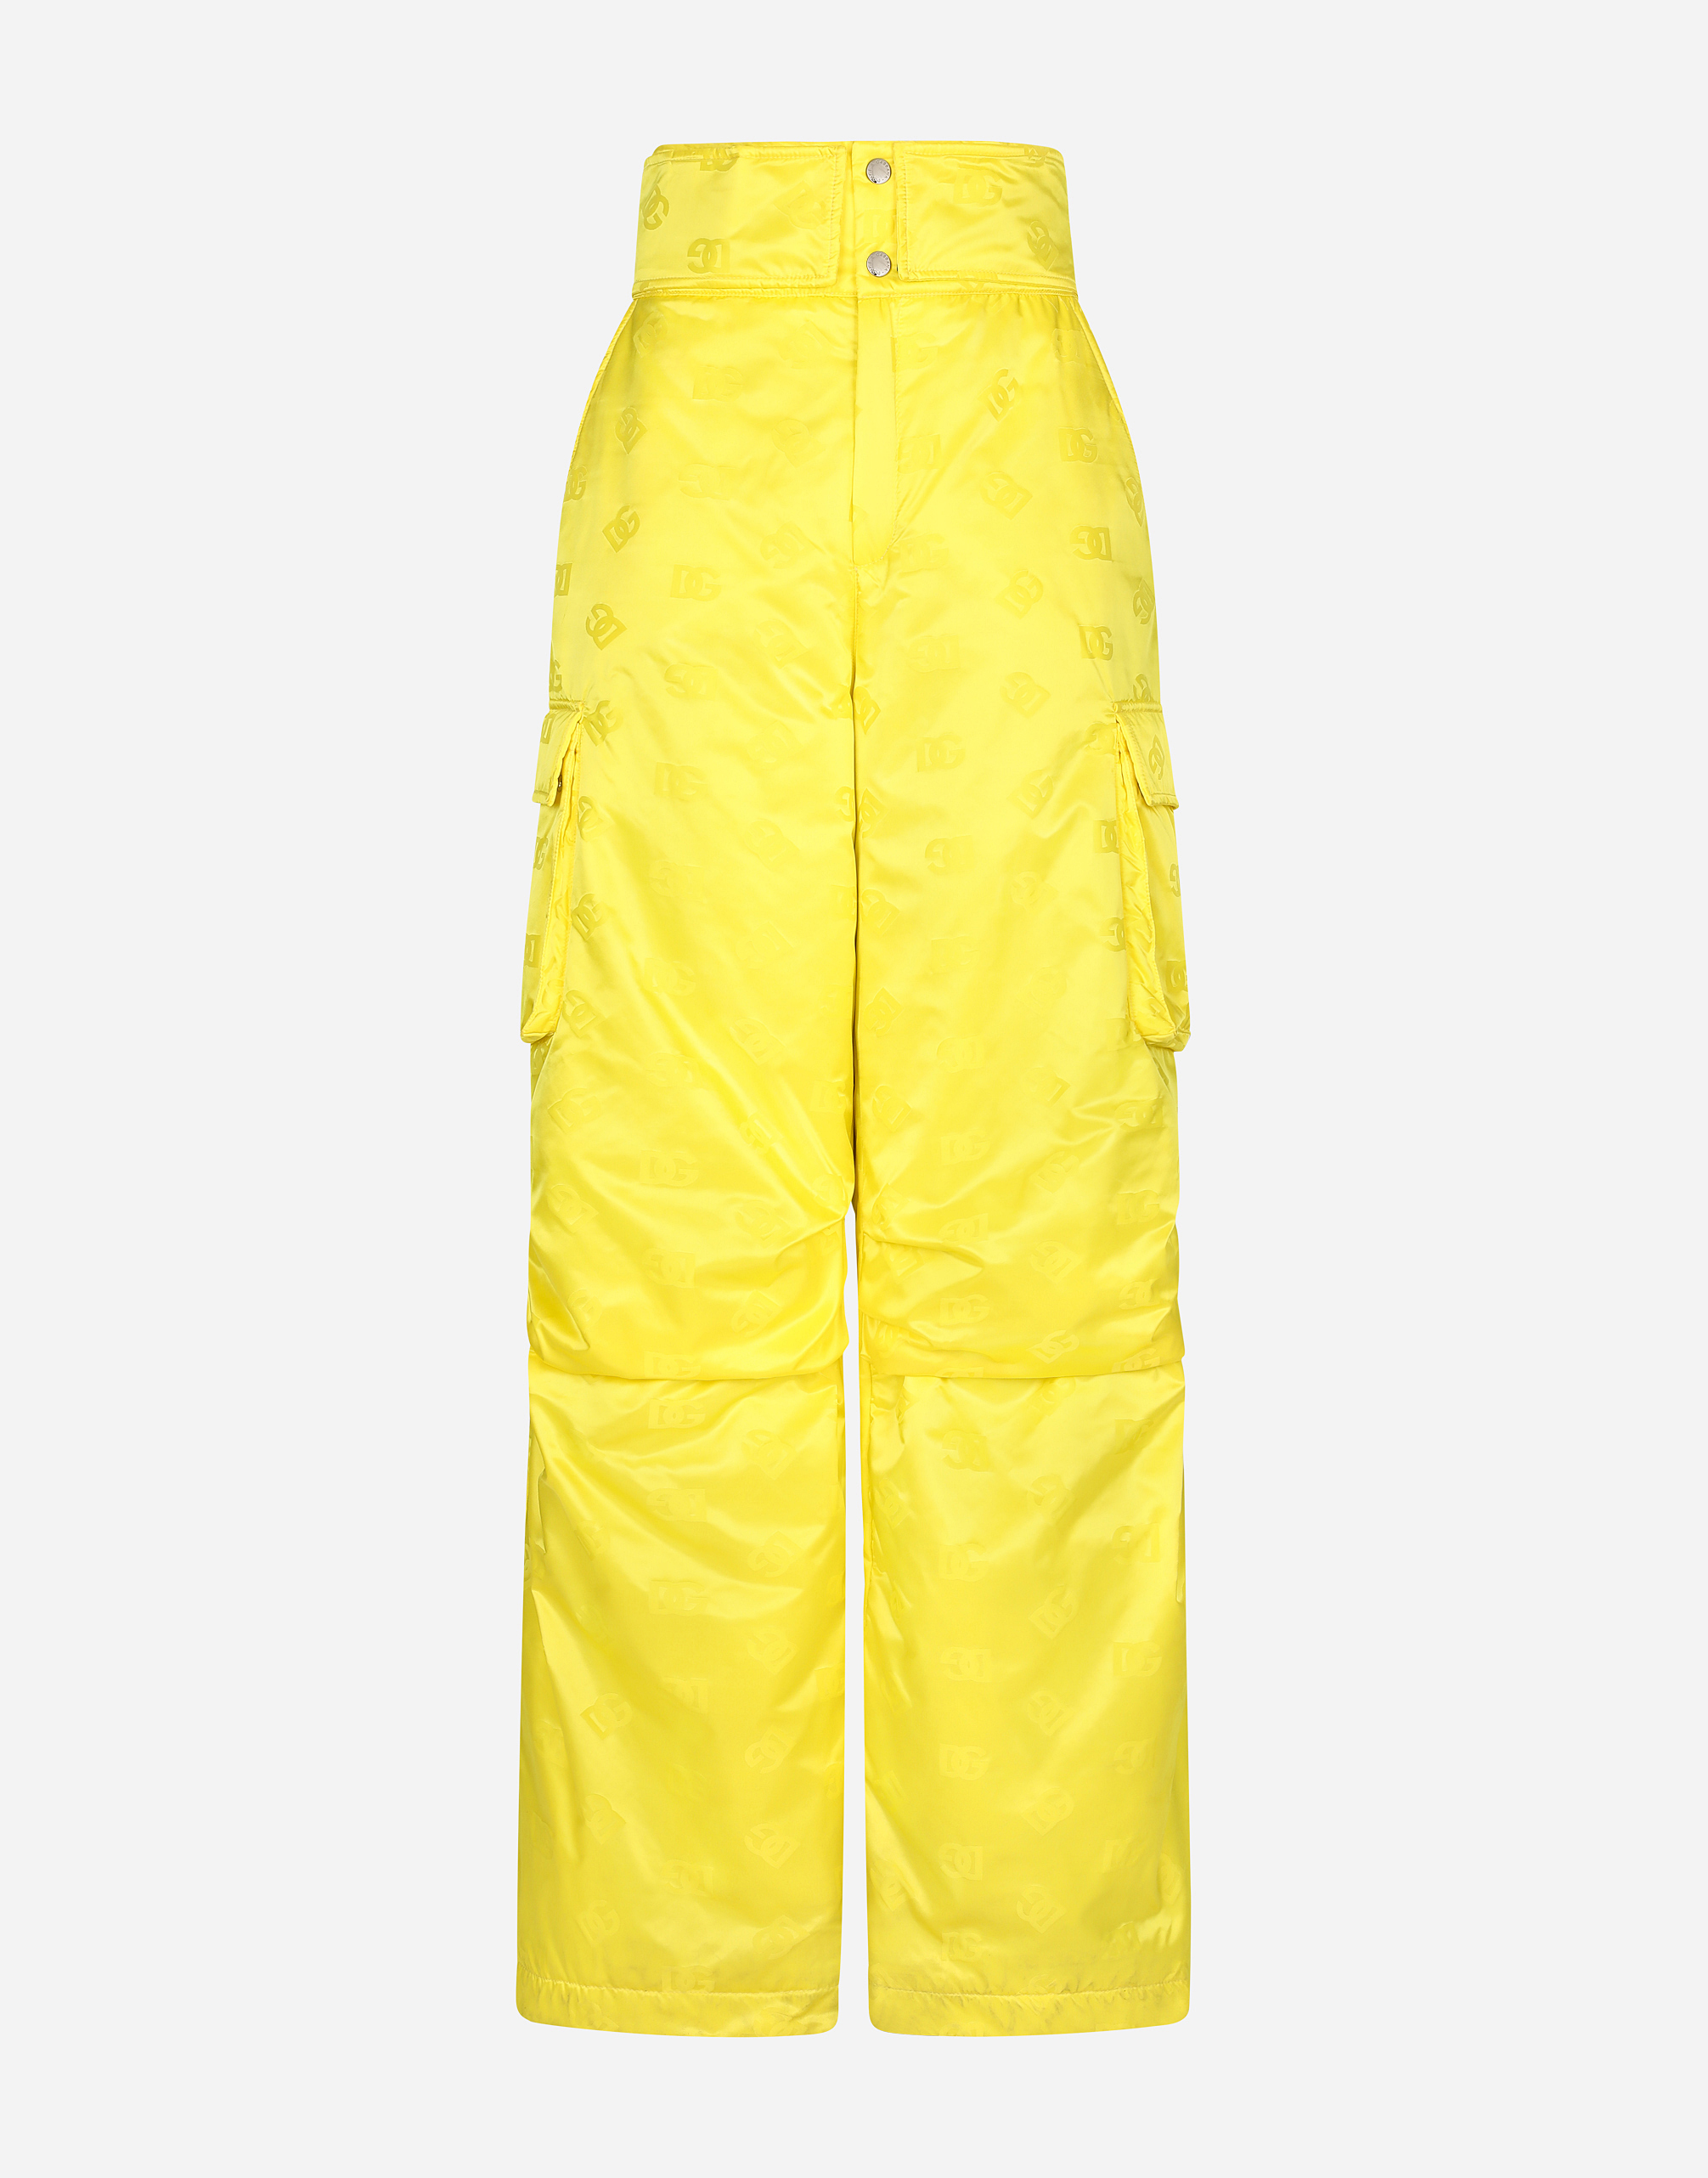 Satin cargo pants with all-over jacquard DG detail in Yellow